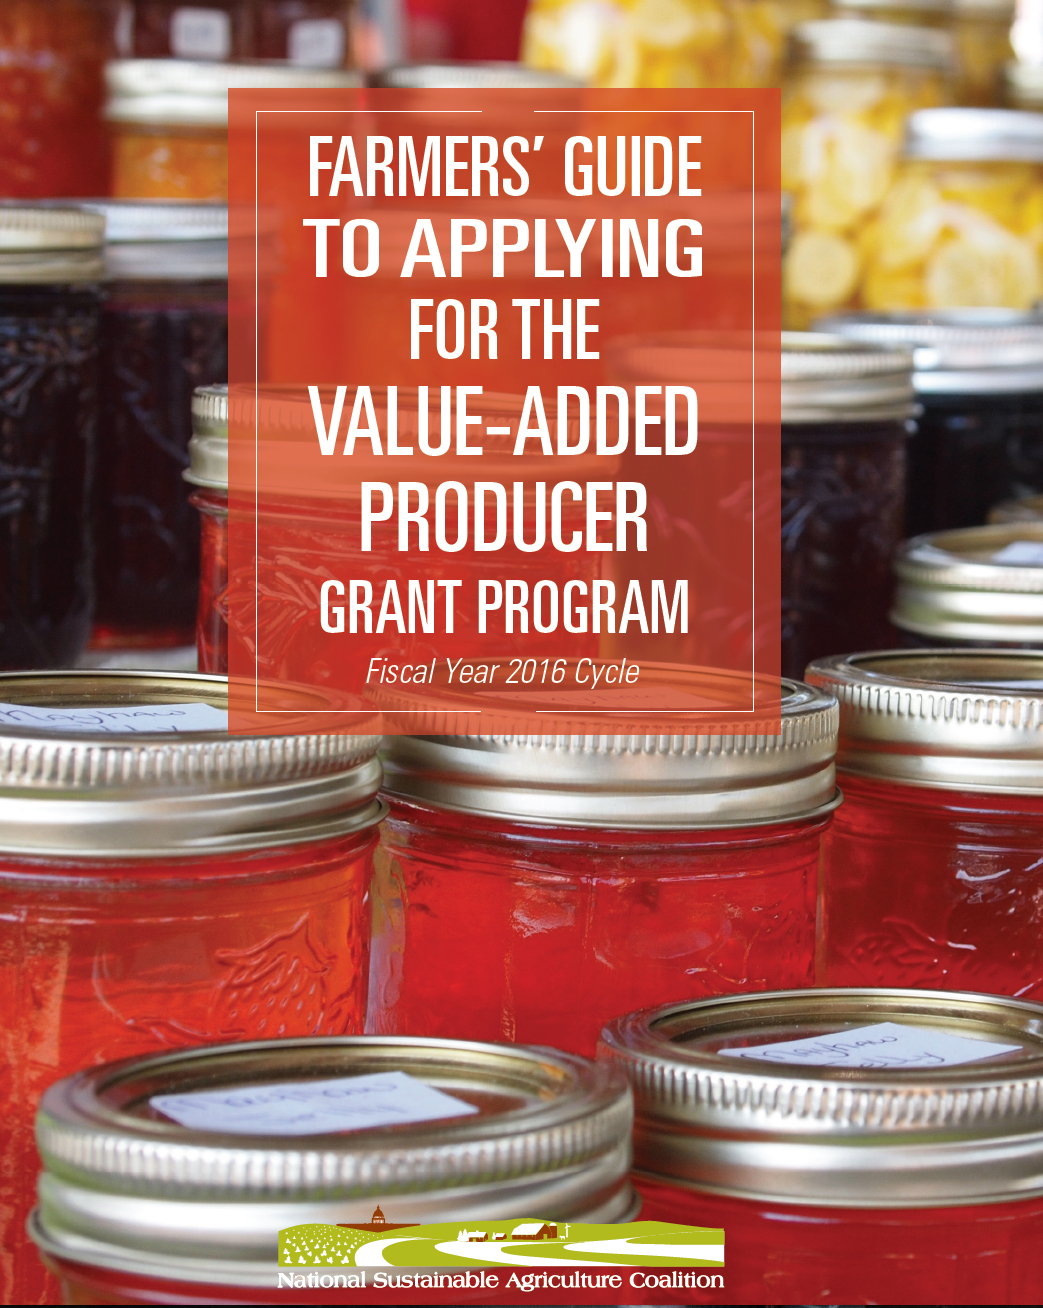 NSAC Guide Helps Farmers Navigate ValueAdded Grant Application